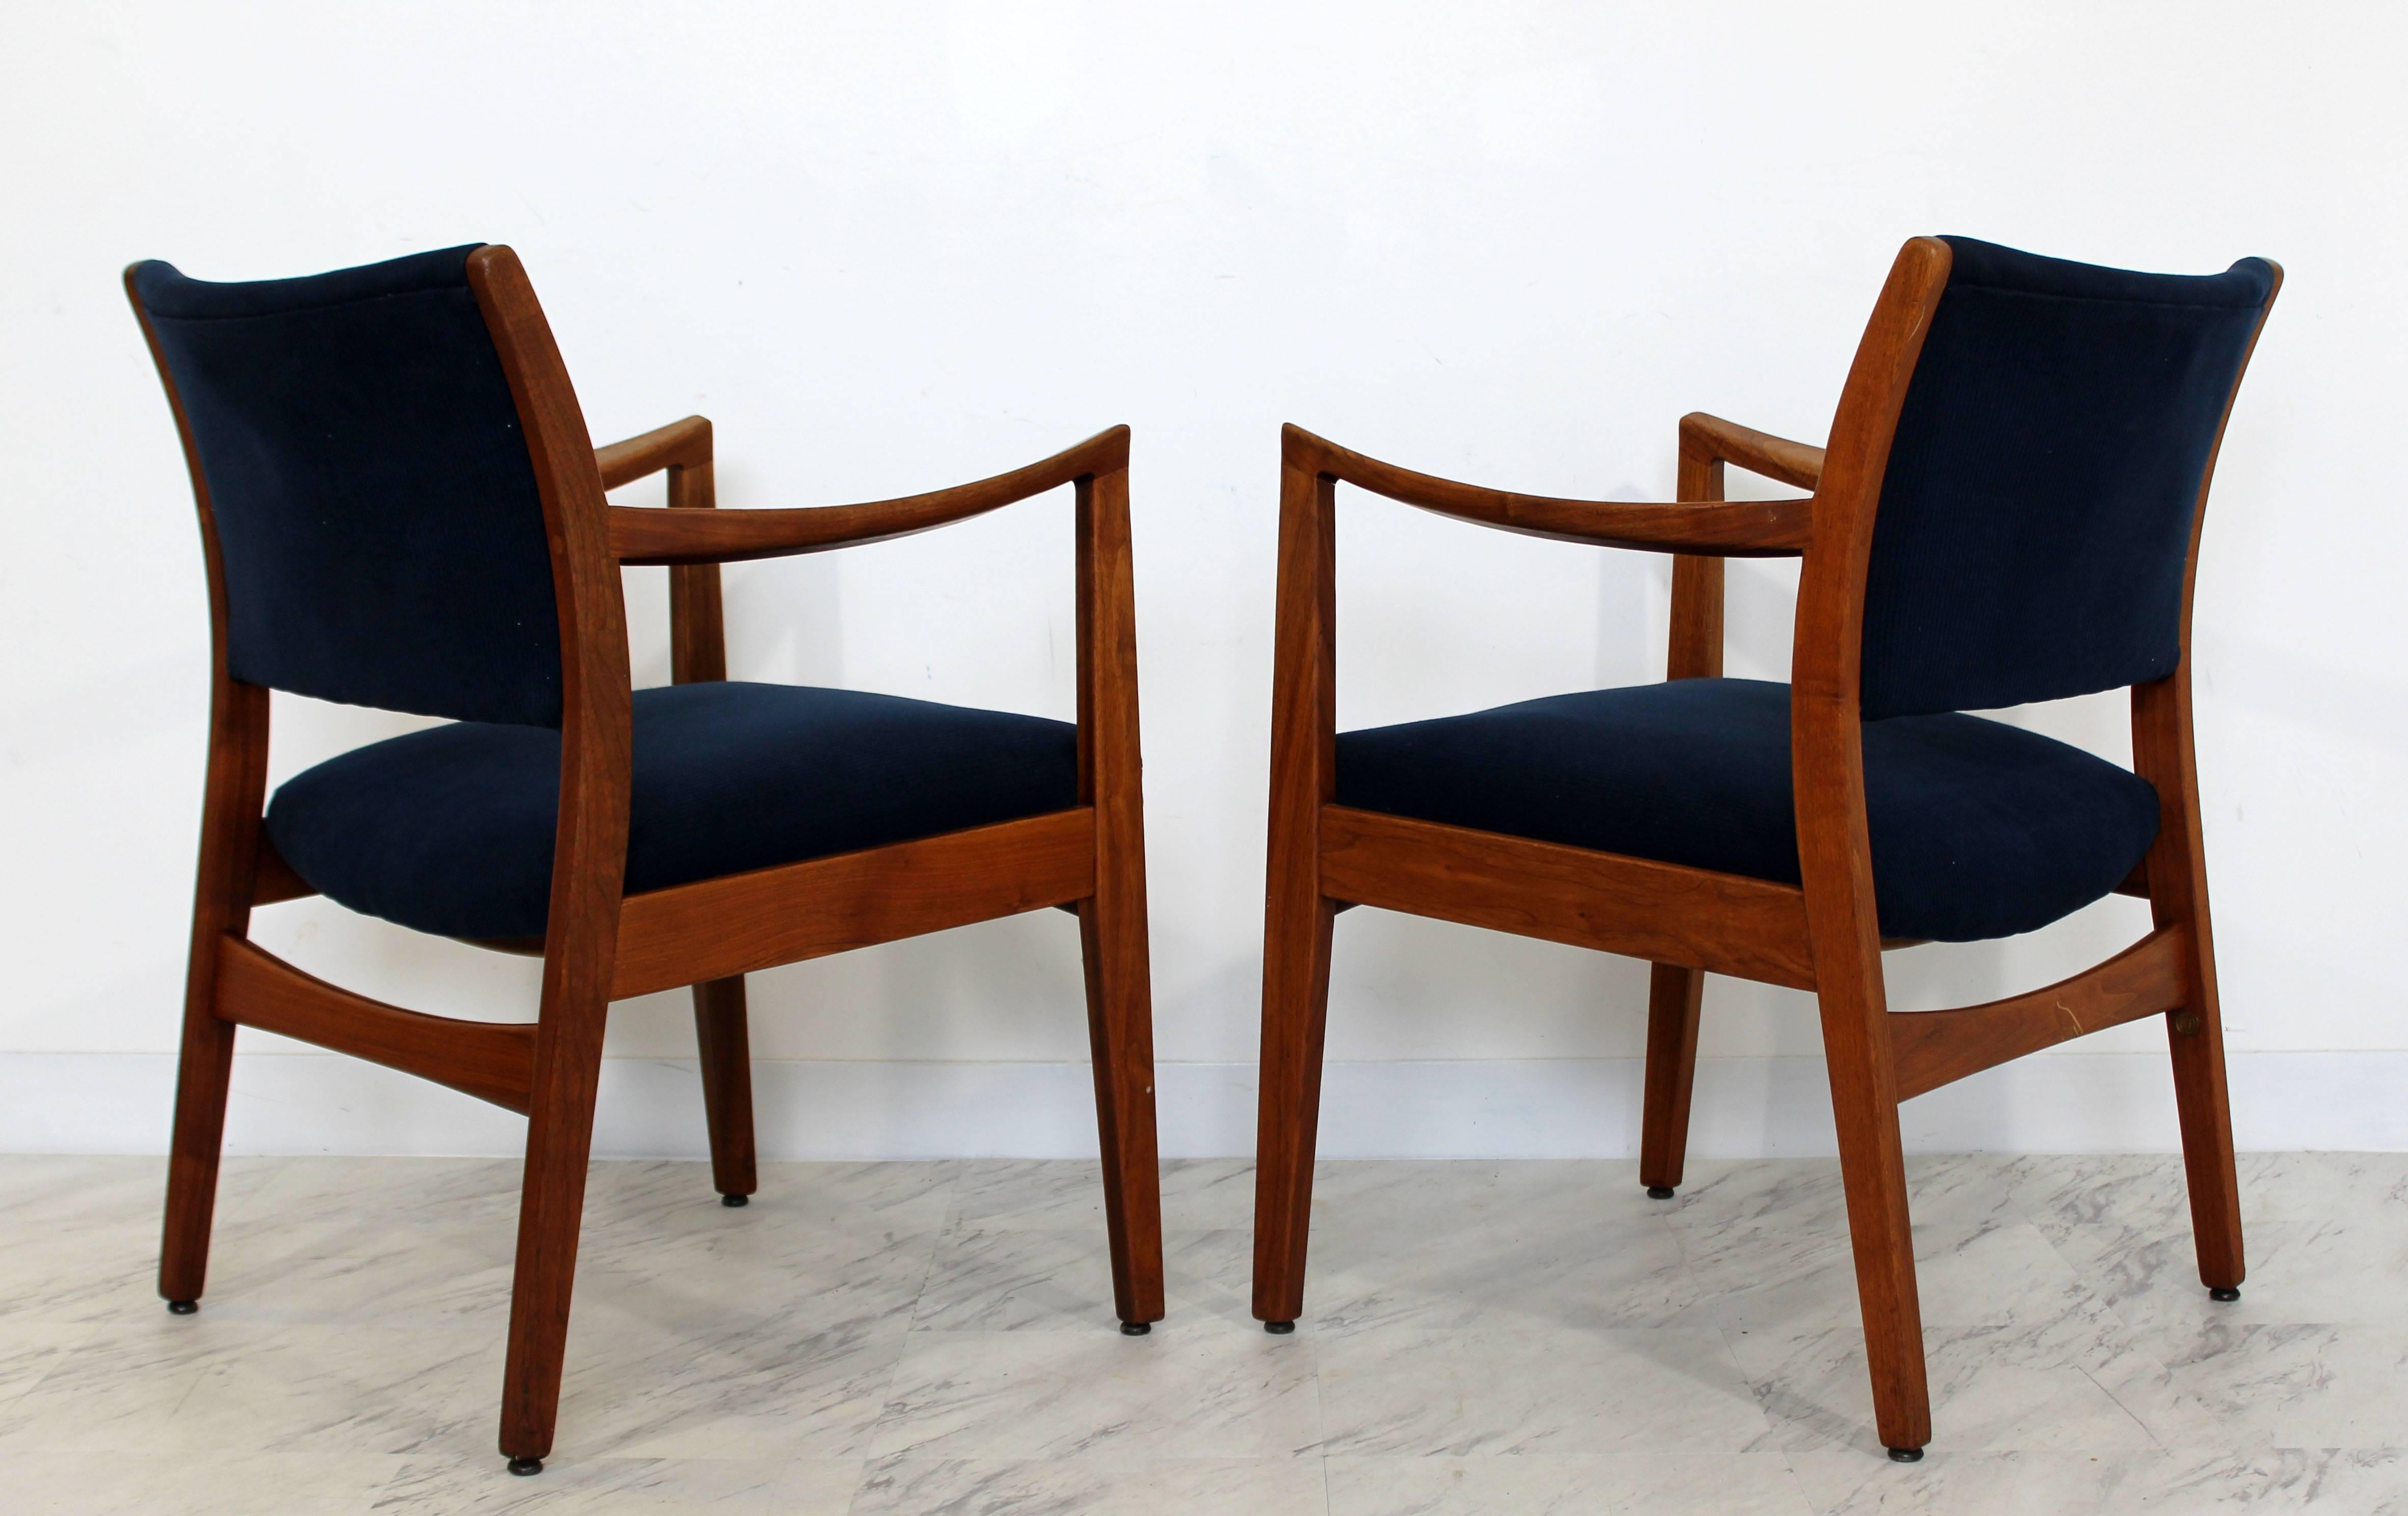 Mid-20th Century Mid-Century Modern Pair of Walnut Armchairs by Johnson 1960s in Jens Risom Style